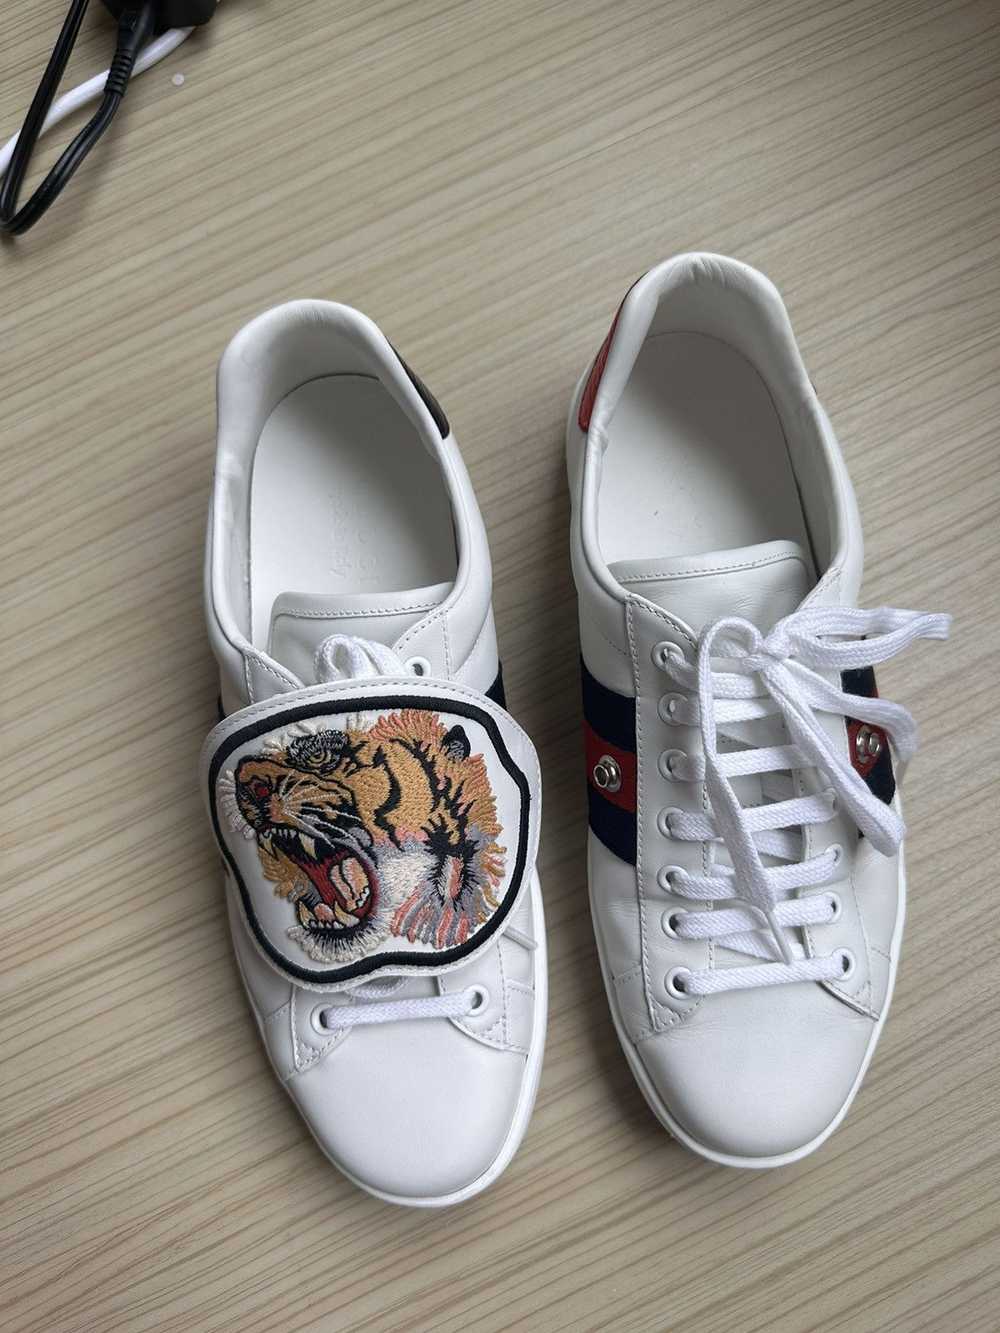 Gucci Gucci Ace Sneakers with Removable Patches - image 2